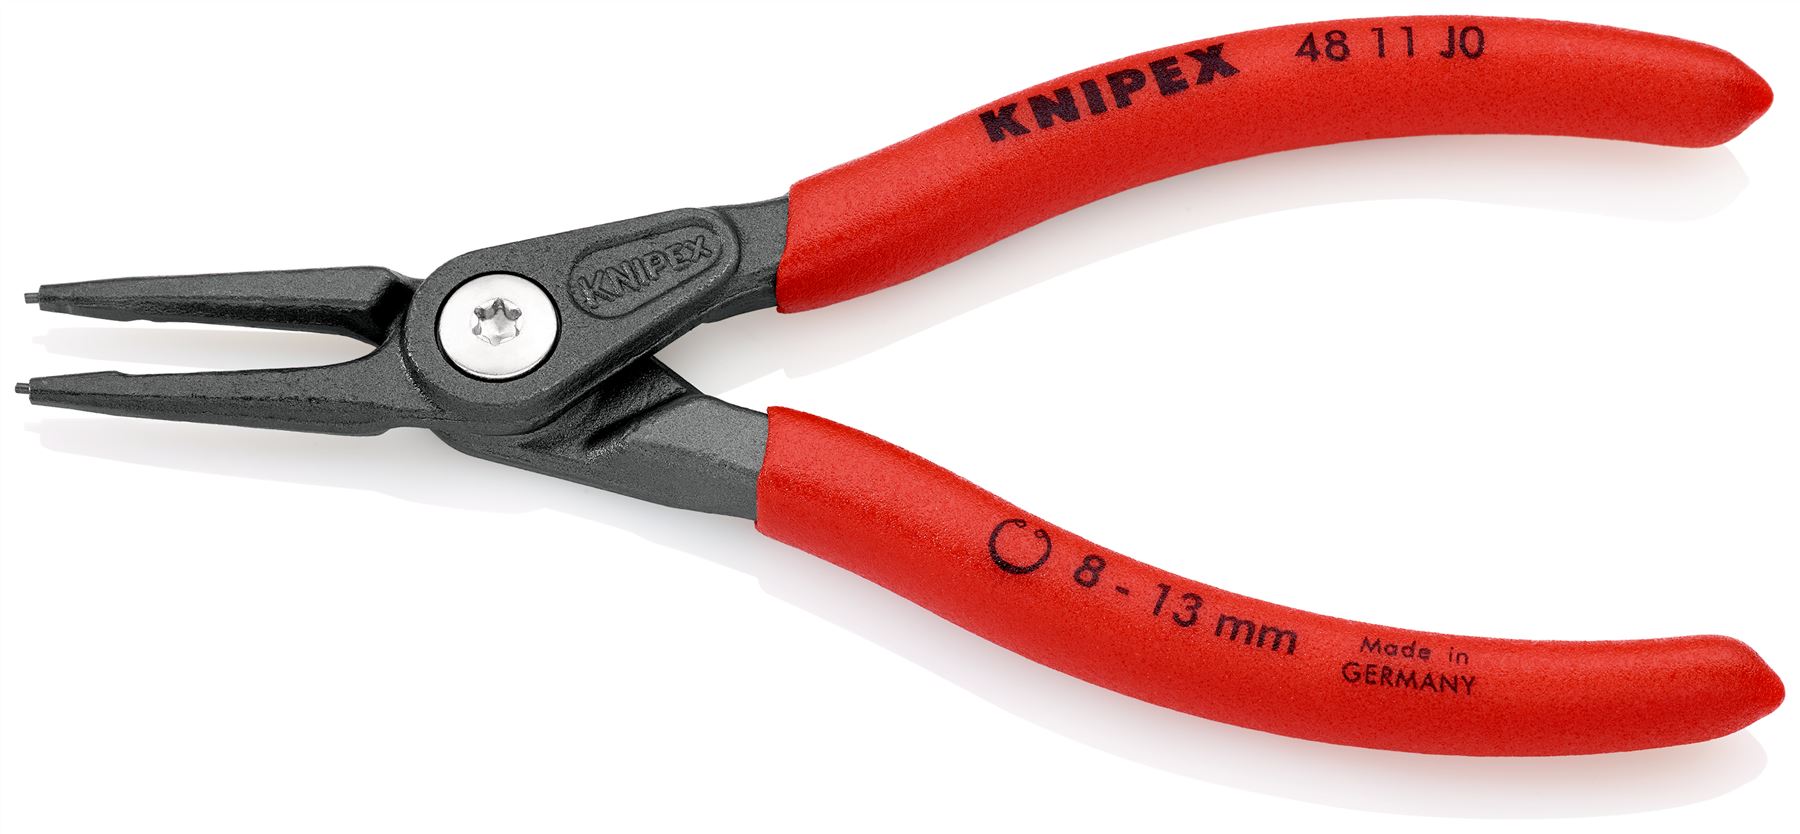 KNIPEX Precision Circlip Pliers for Internal Circlips in Bore Holes 140mm 0.9mm Diameter Tips 40 11 J0